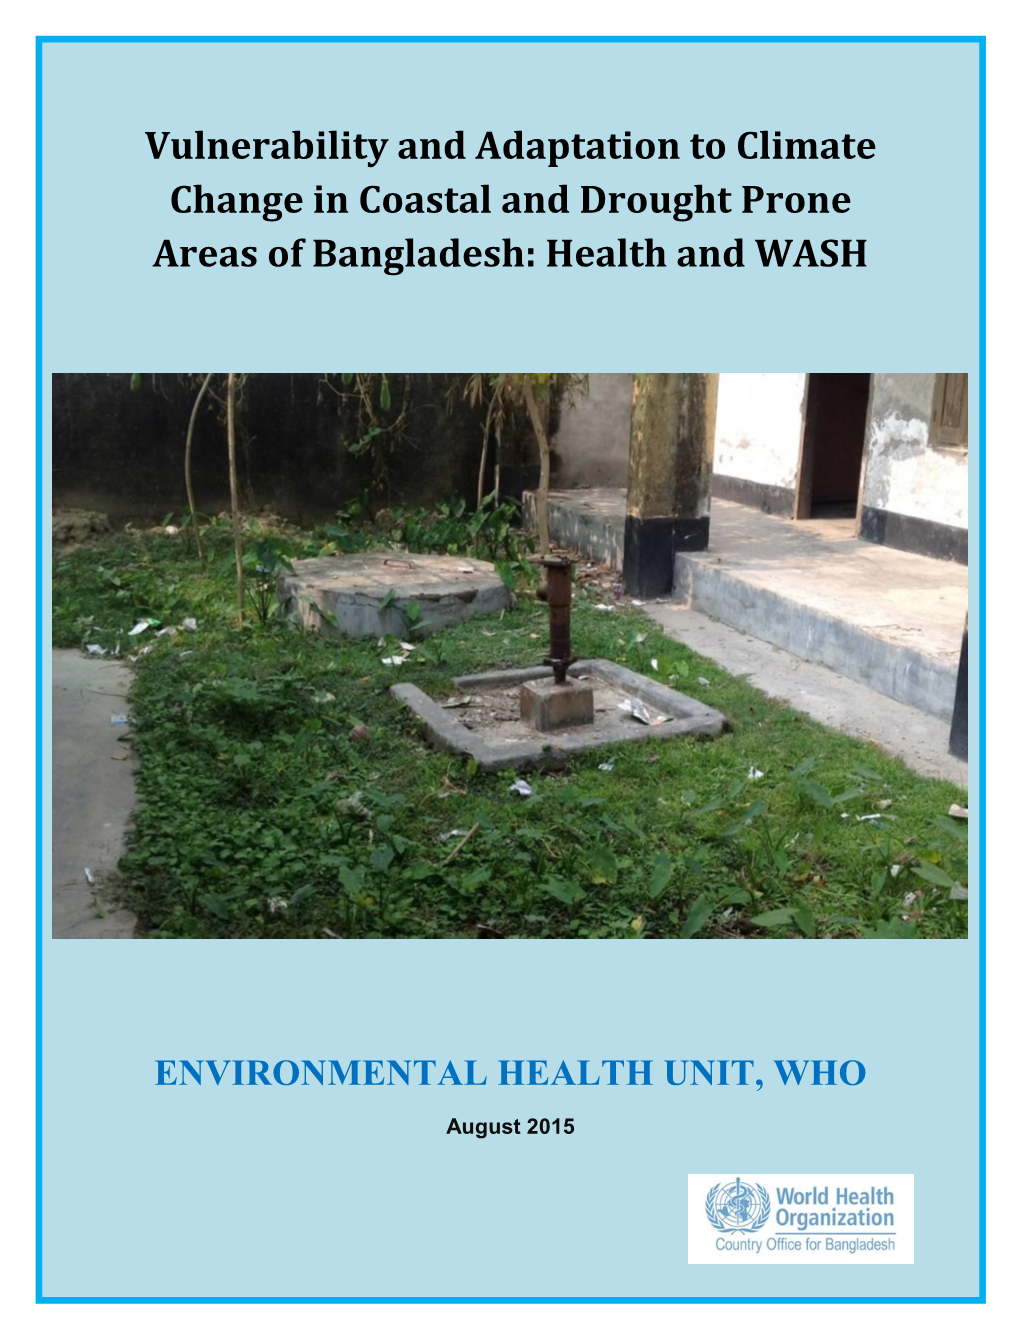 Vulnerability and Adaptation to Climate Change in Coastal and Drought Prone Areas of Bangladesh: Health and WASH